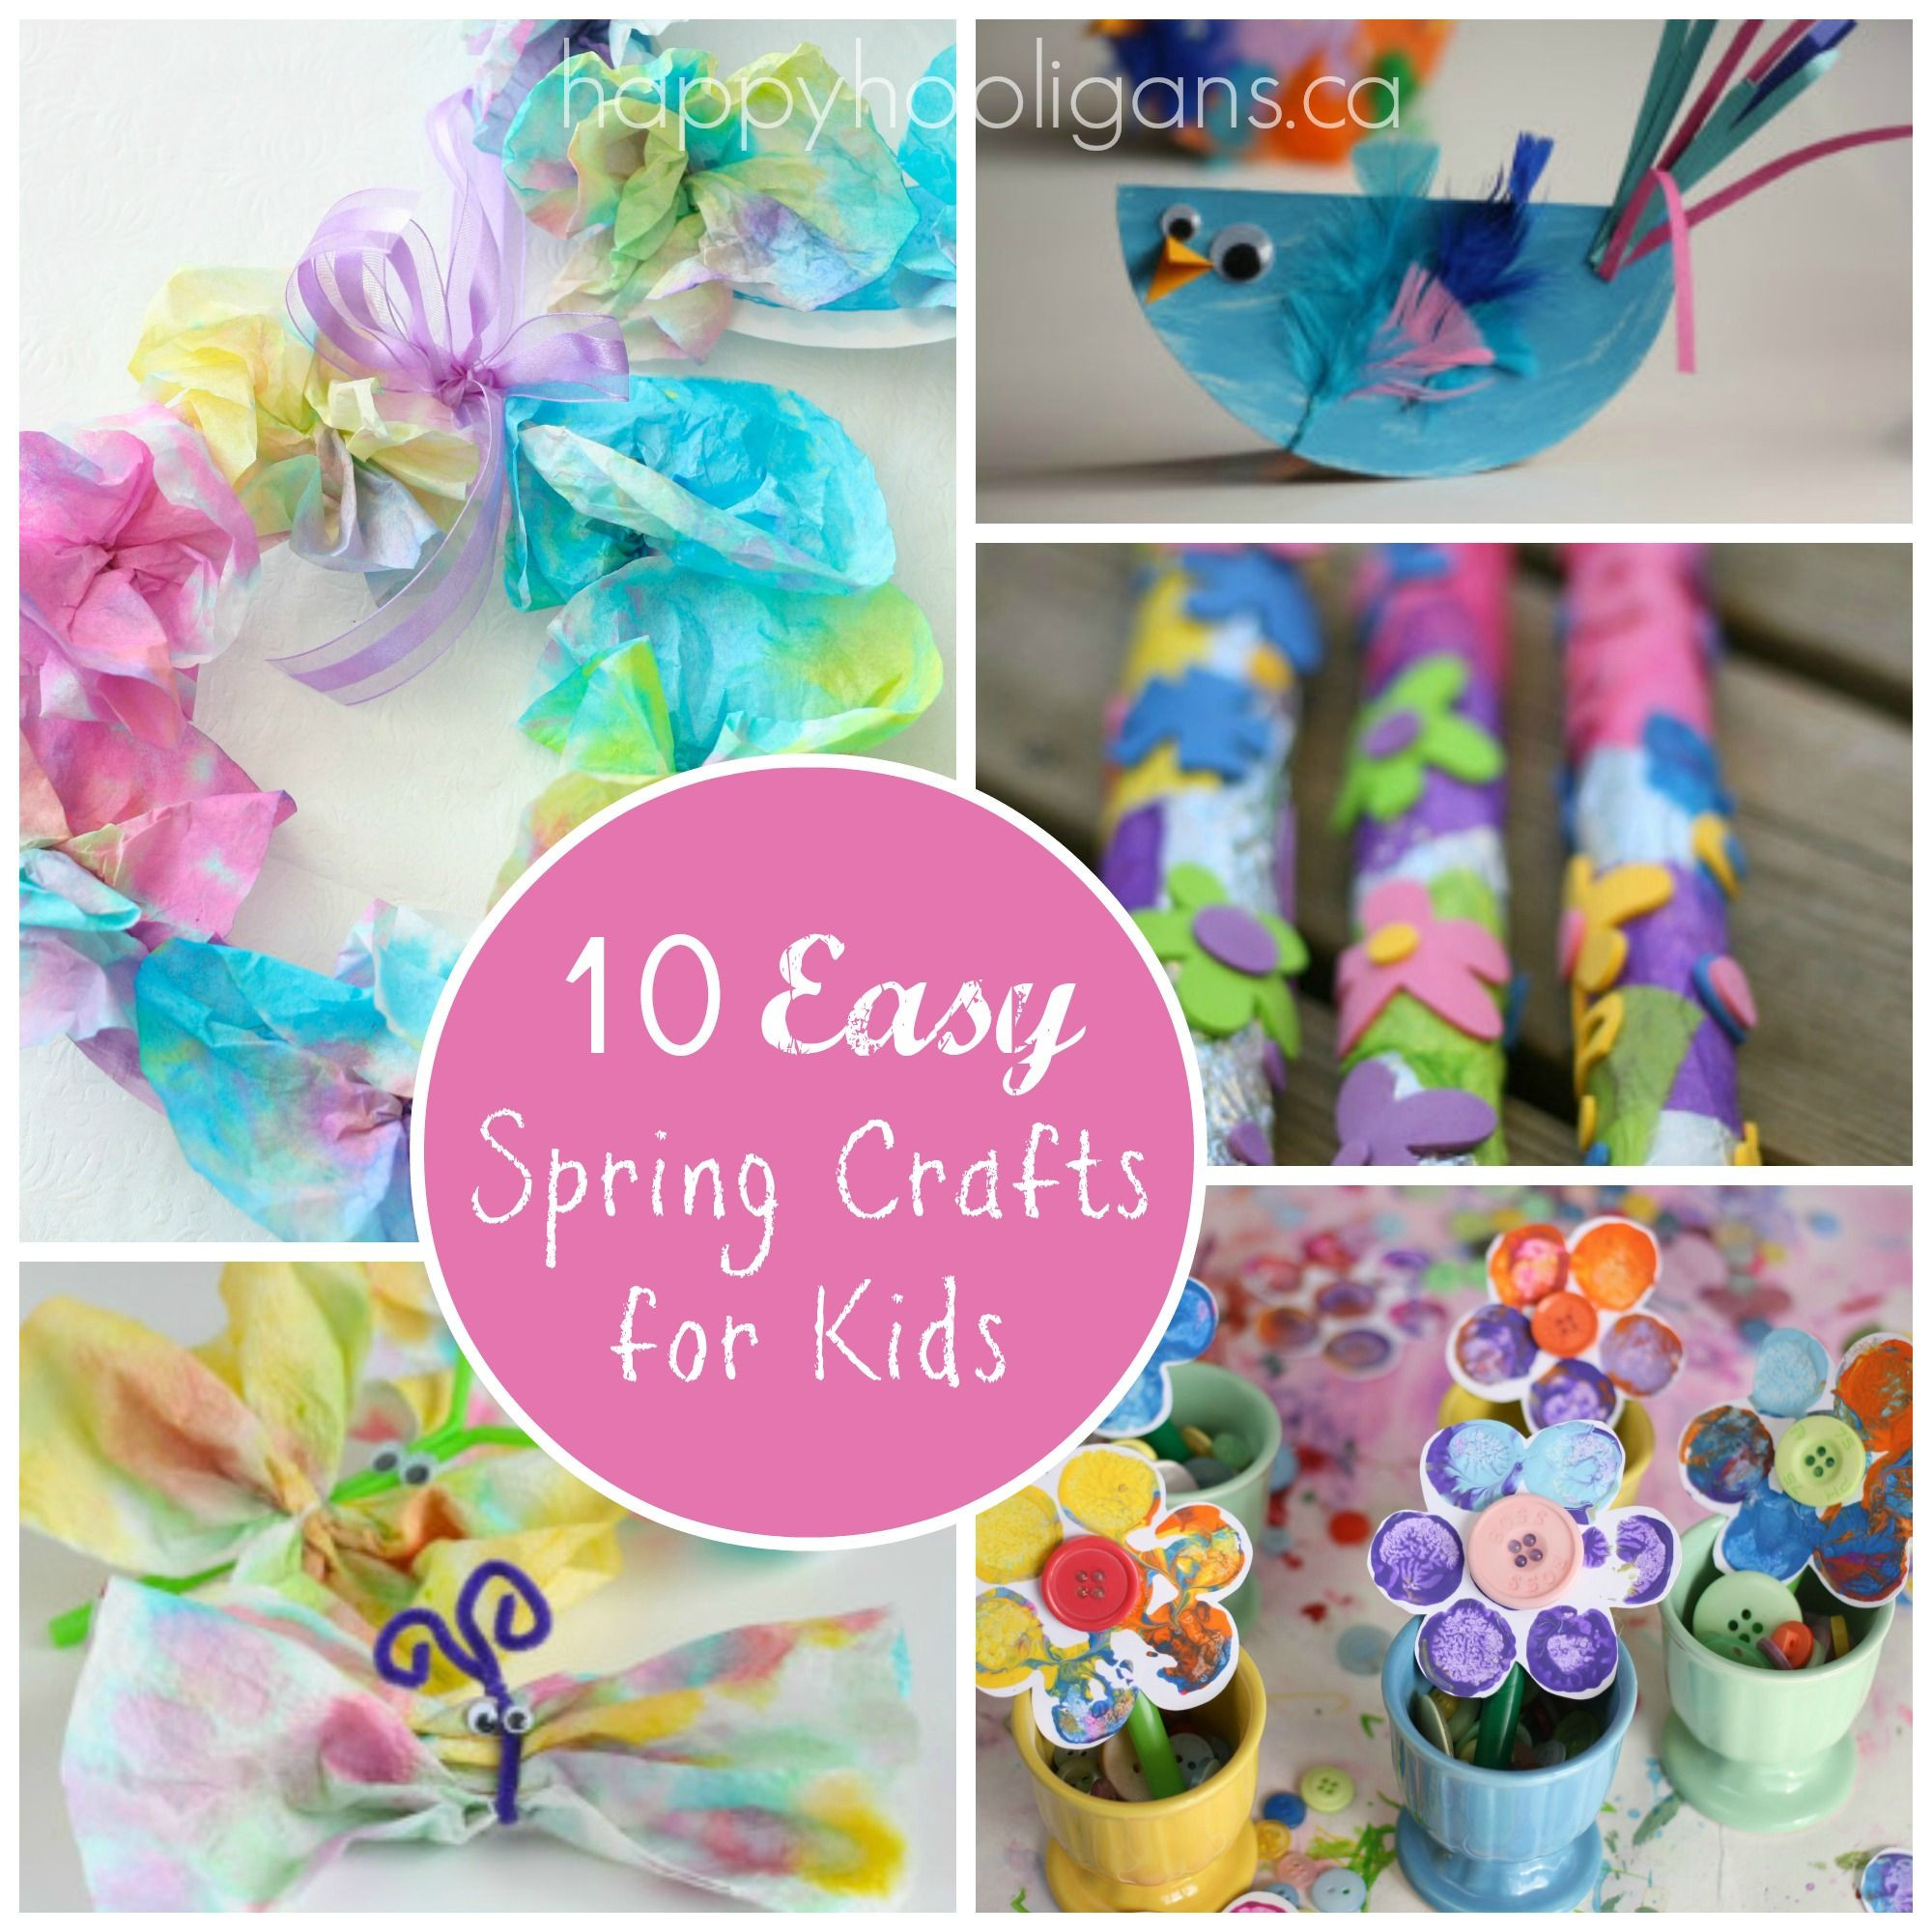 Springtime Crafts For Toddlers
 10 Easy Spring crafts for toddlers and preschoolers